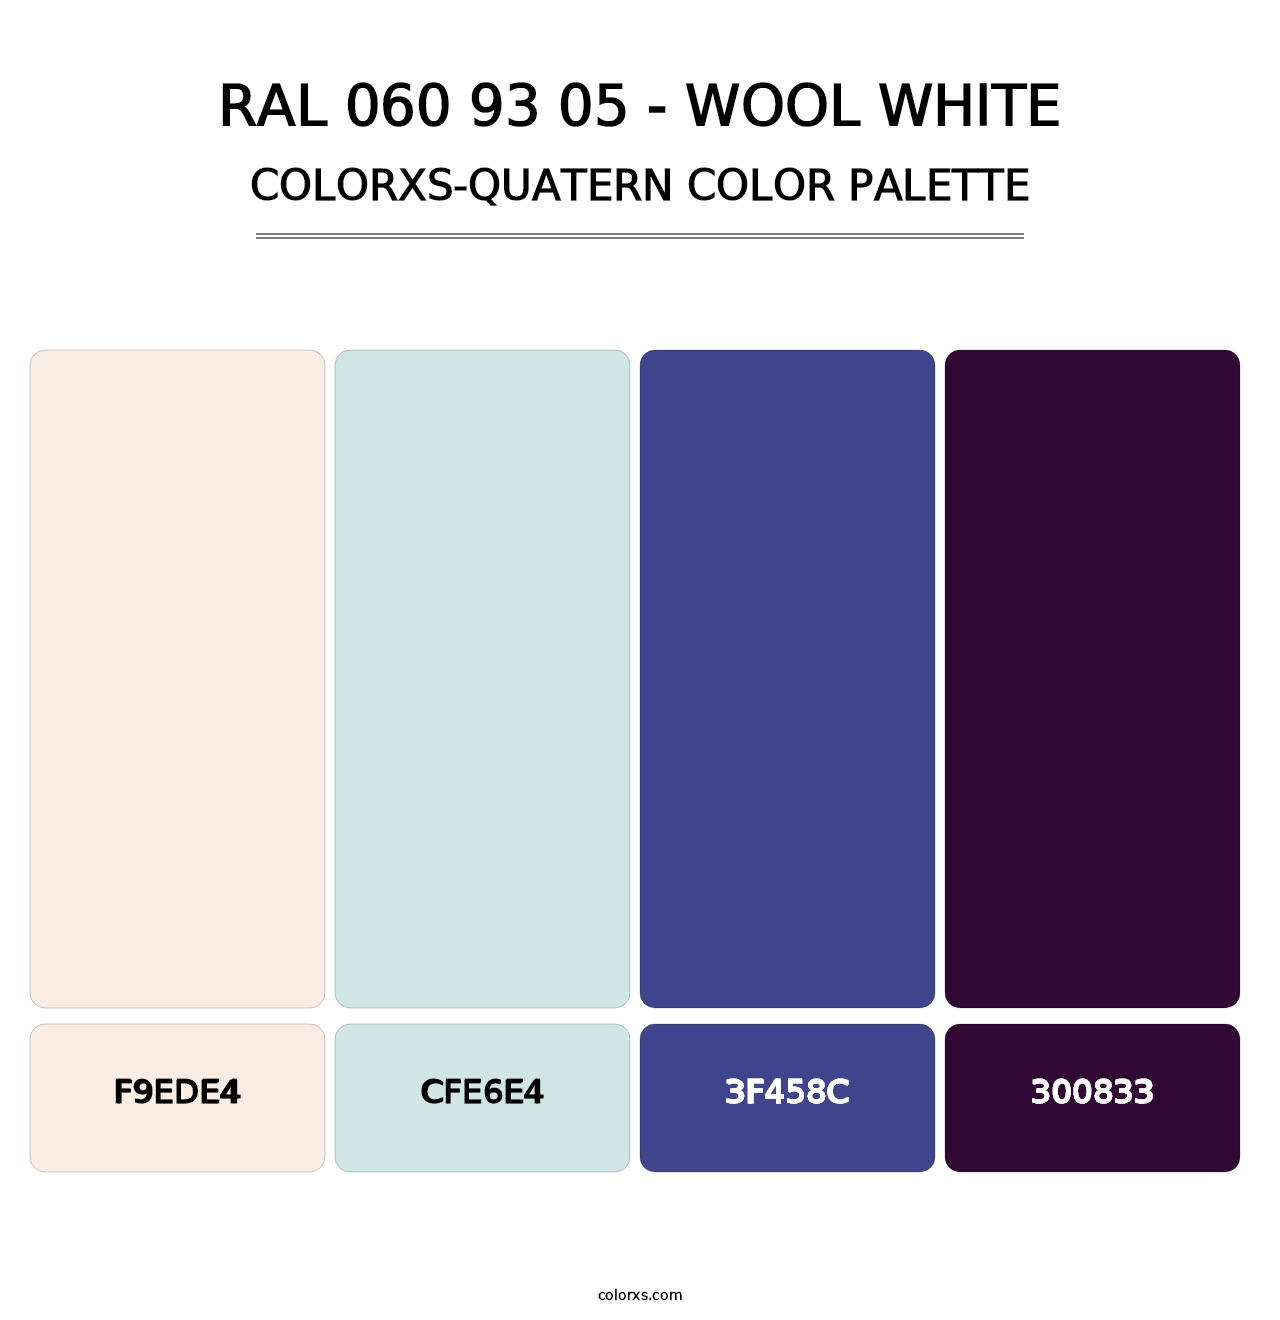 RAL 060 93 05 - Wool White - Colorxs Quatern Palette